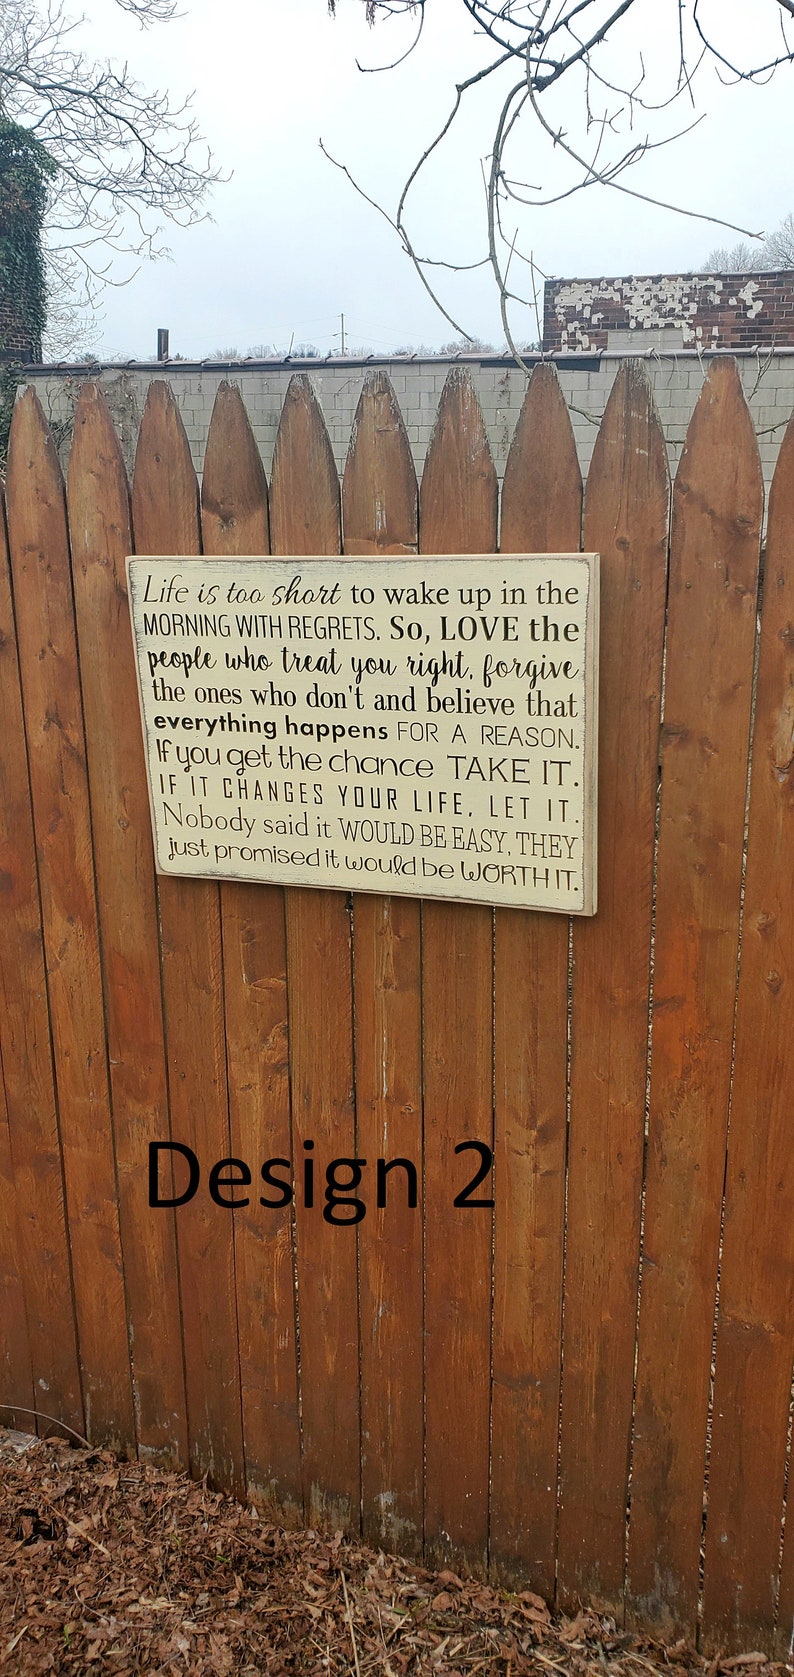 Custom Carved Wooden Sign Life is too short to wake up with regrets. So, love the peole who treat you right ... image 2